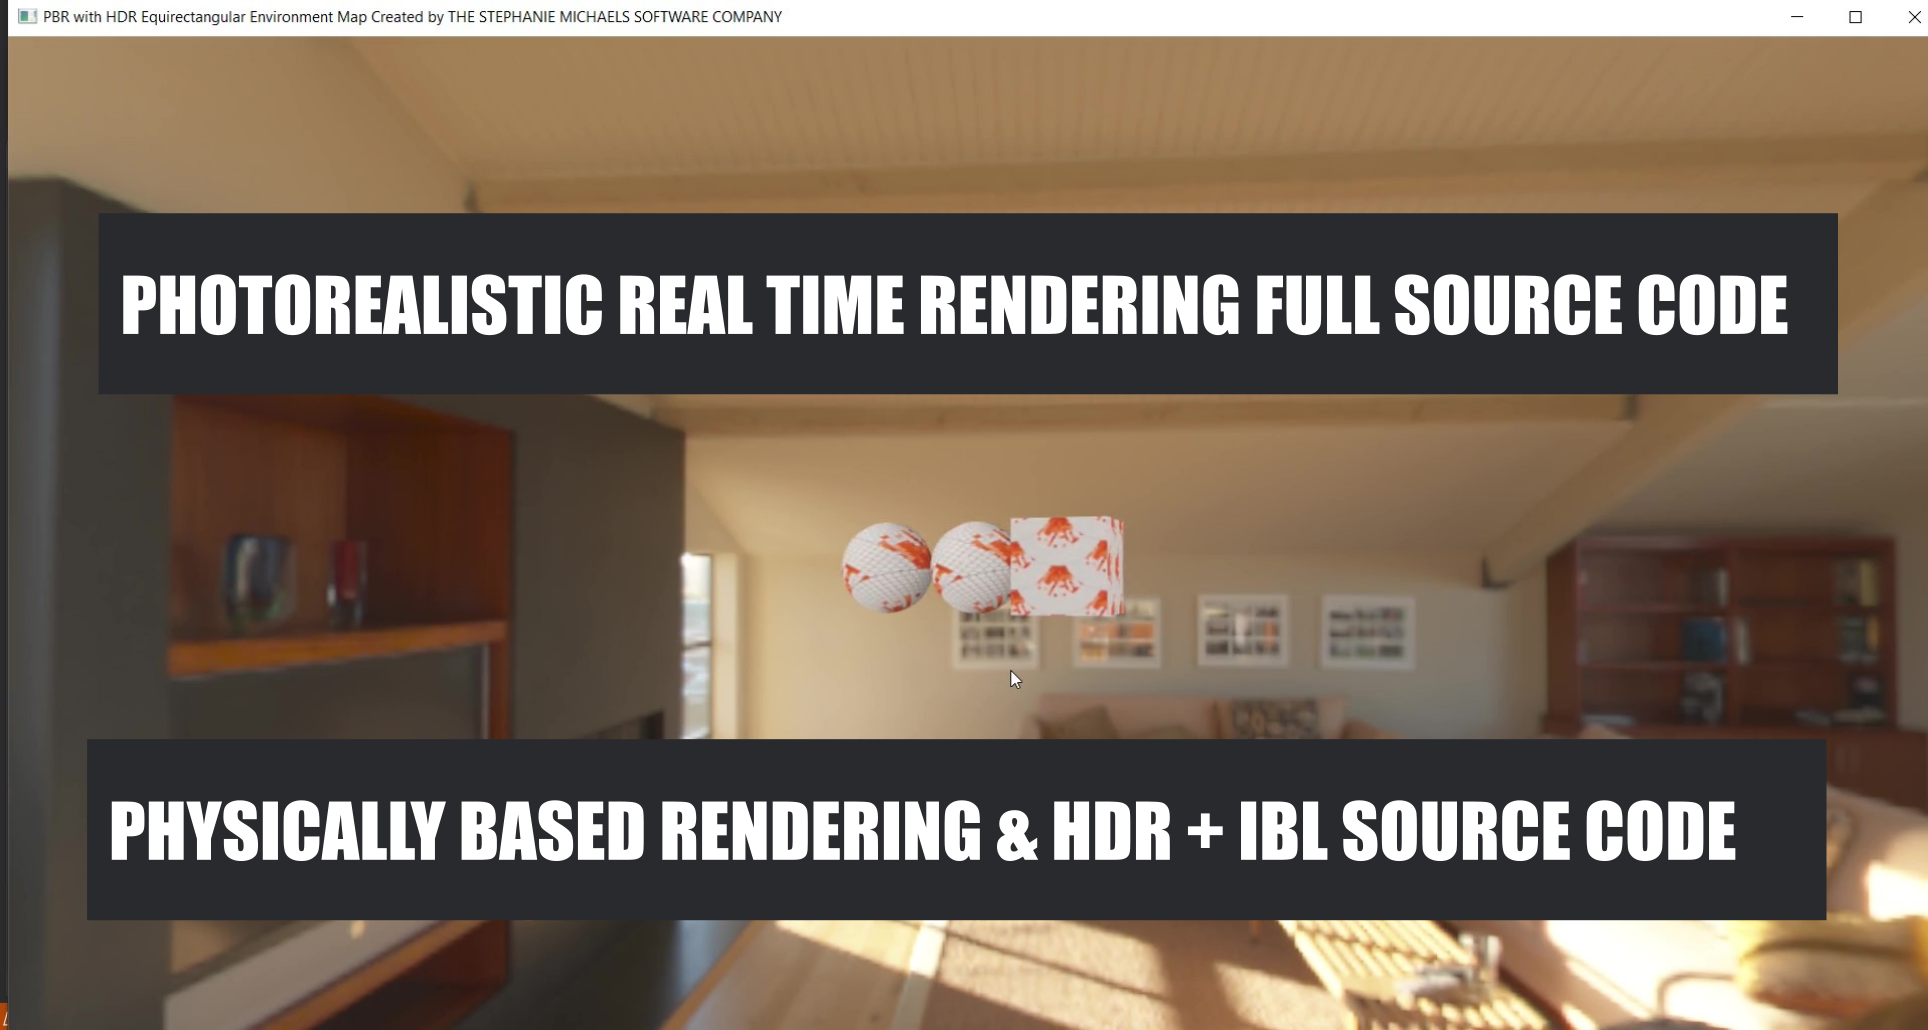 PBR, IBL & HDR Full Source Code for Photorealistic Real Time Rendering